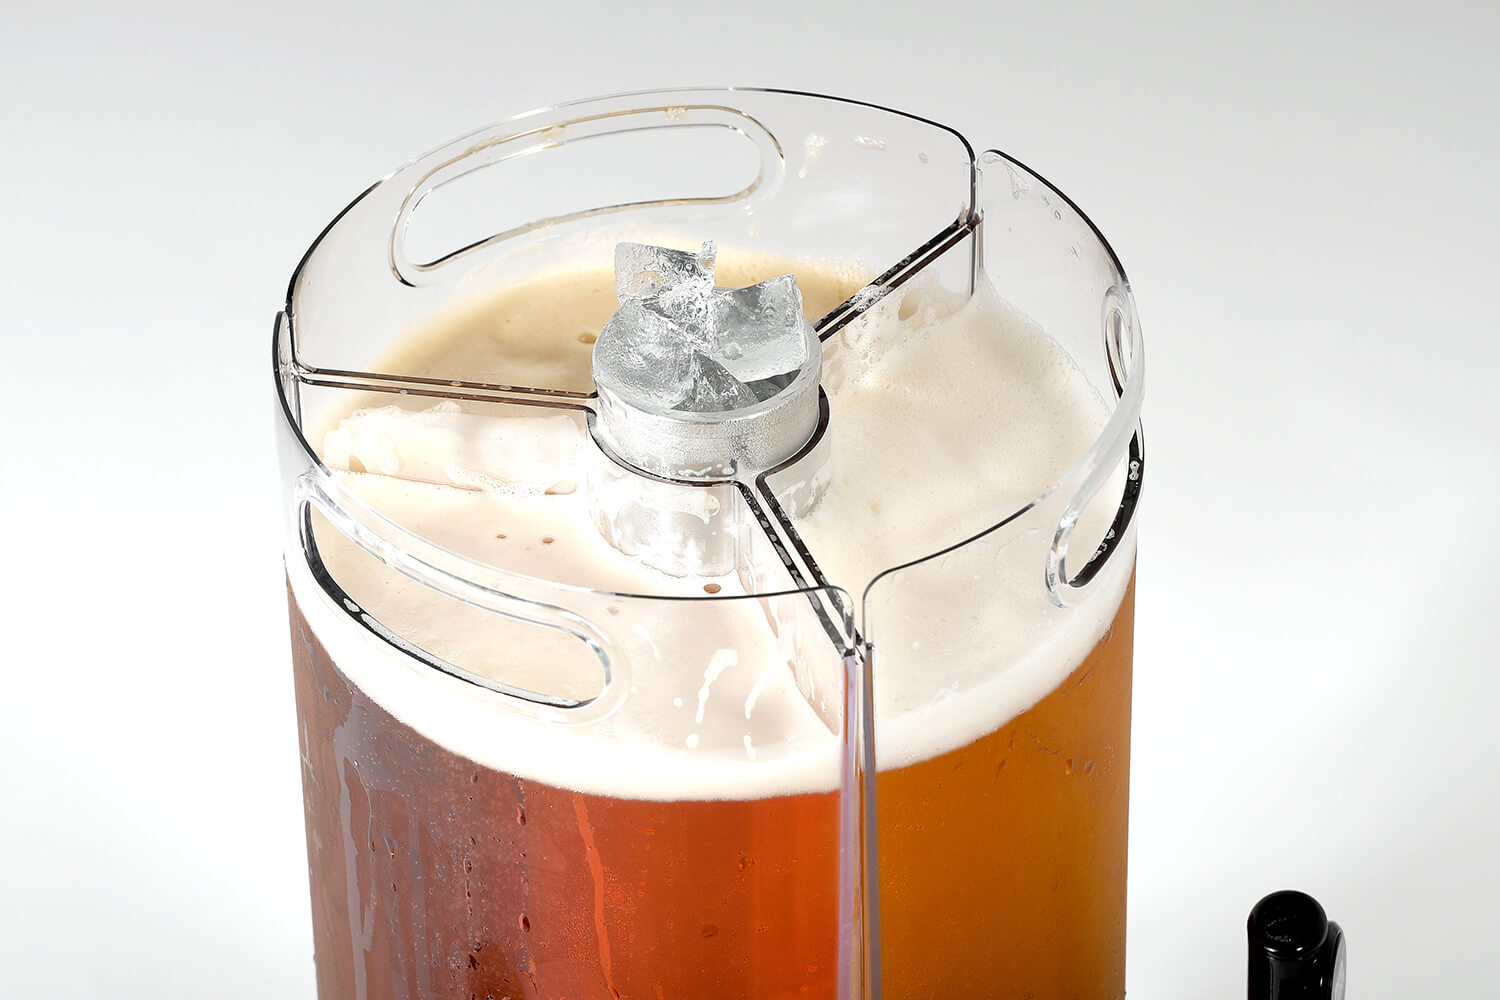 close up of ice in the core chamber and three jugs filled with beer